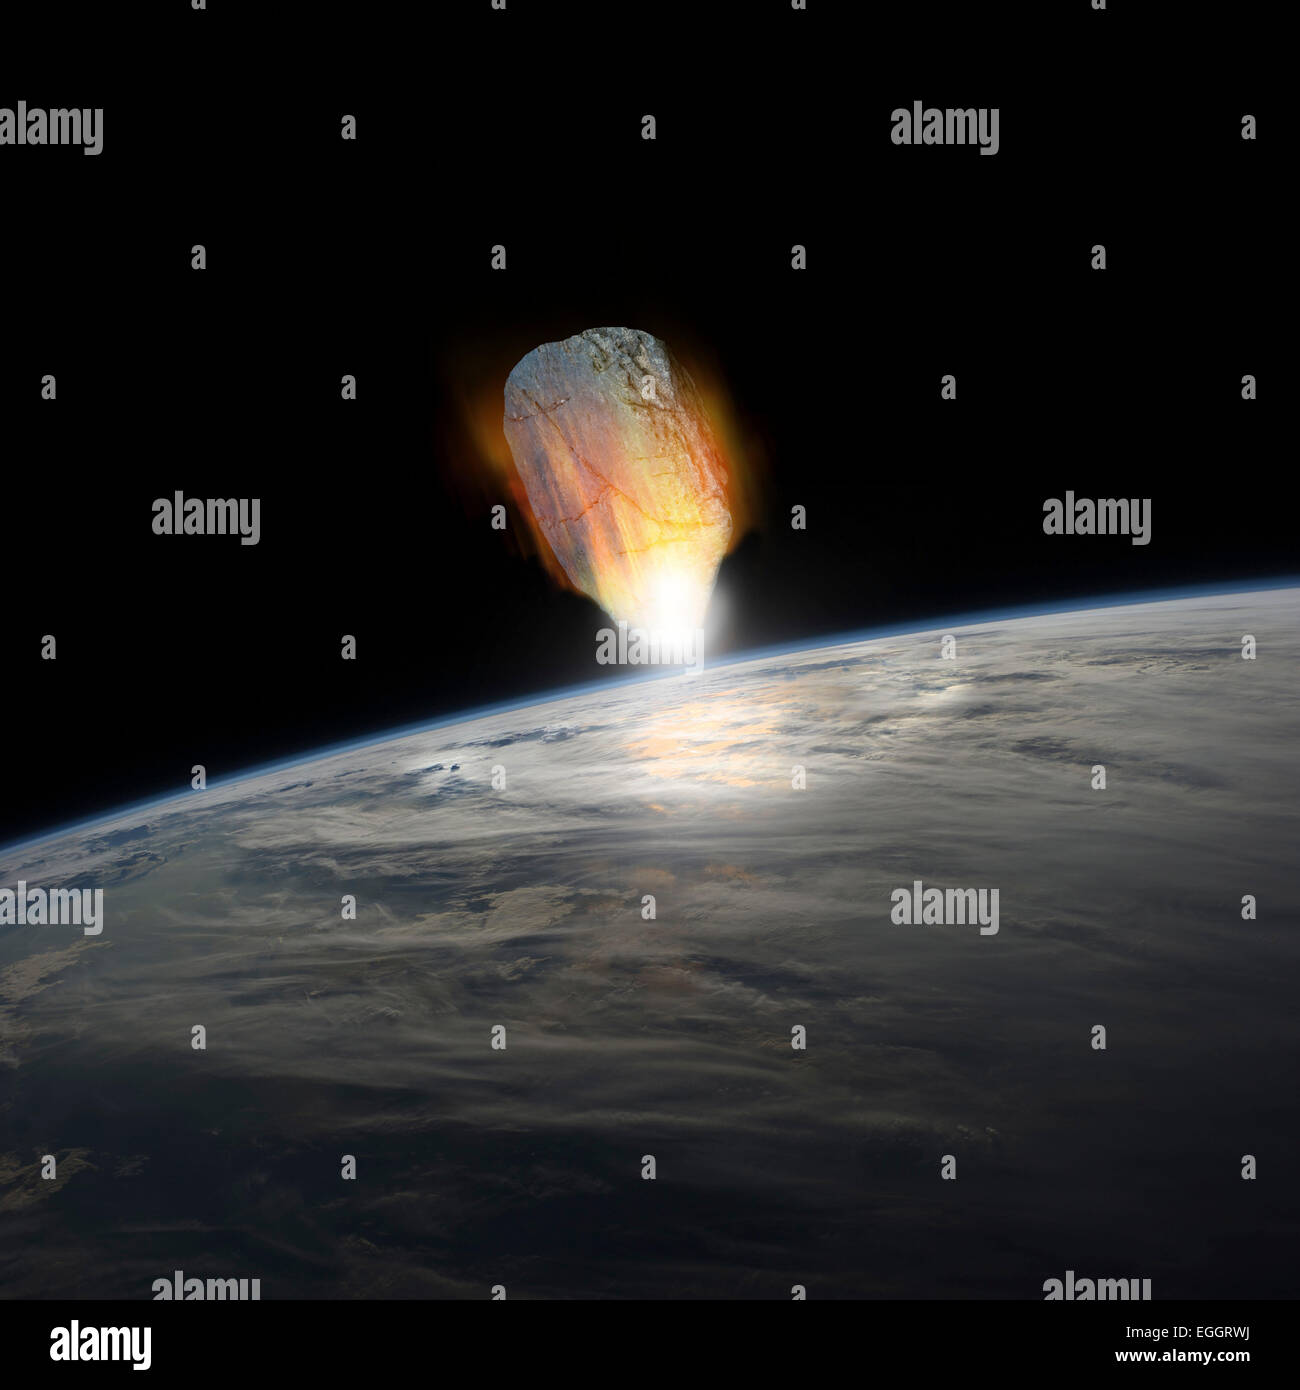 A massive asteroid, glowing white hot, enters Earth's atmosphere moments before impact with the planet. Stock Photo